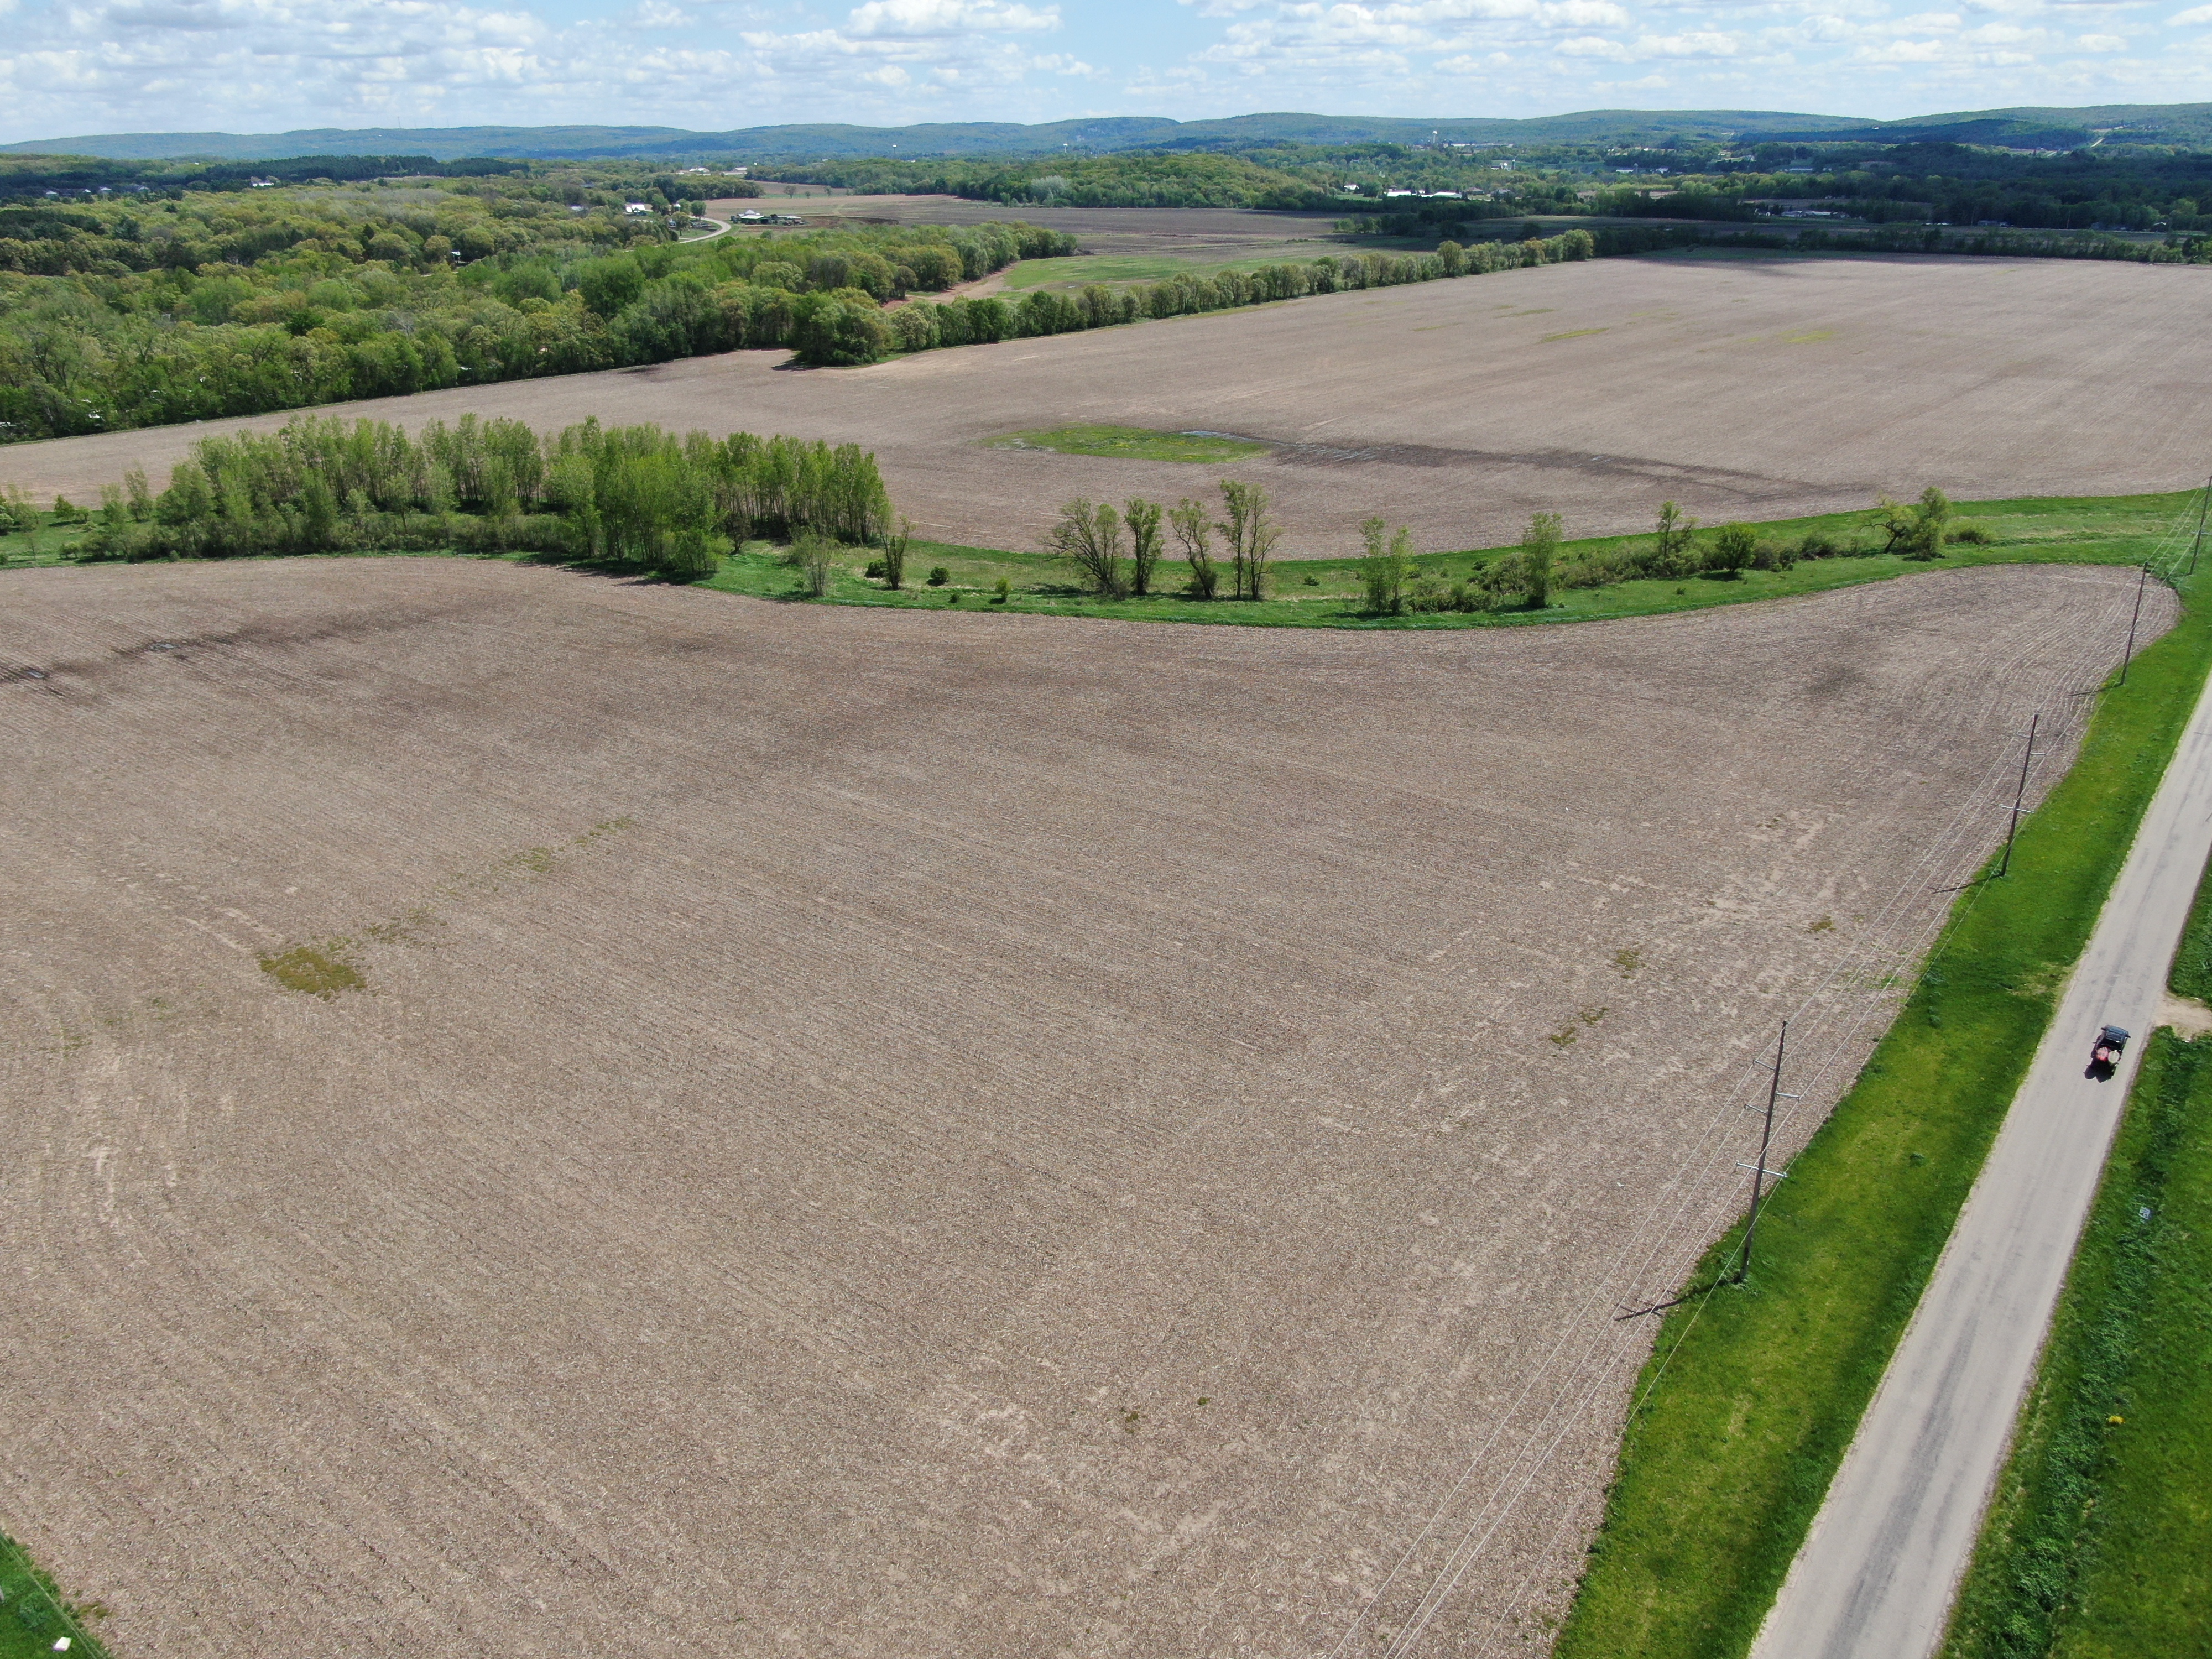 126+/- acre Tillable farm located just outside the City of Baraboo